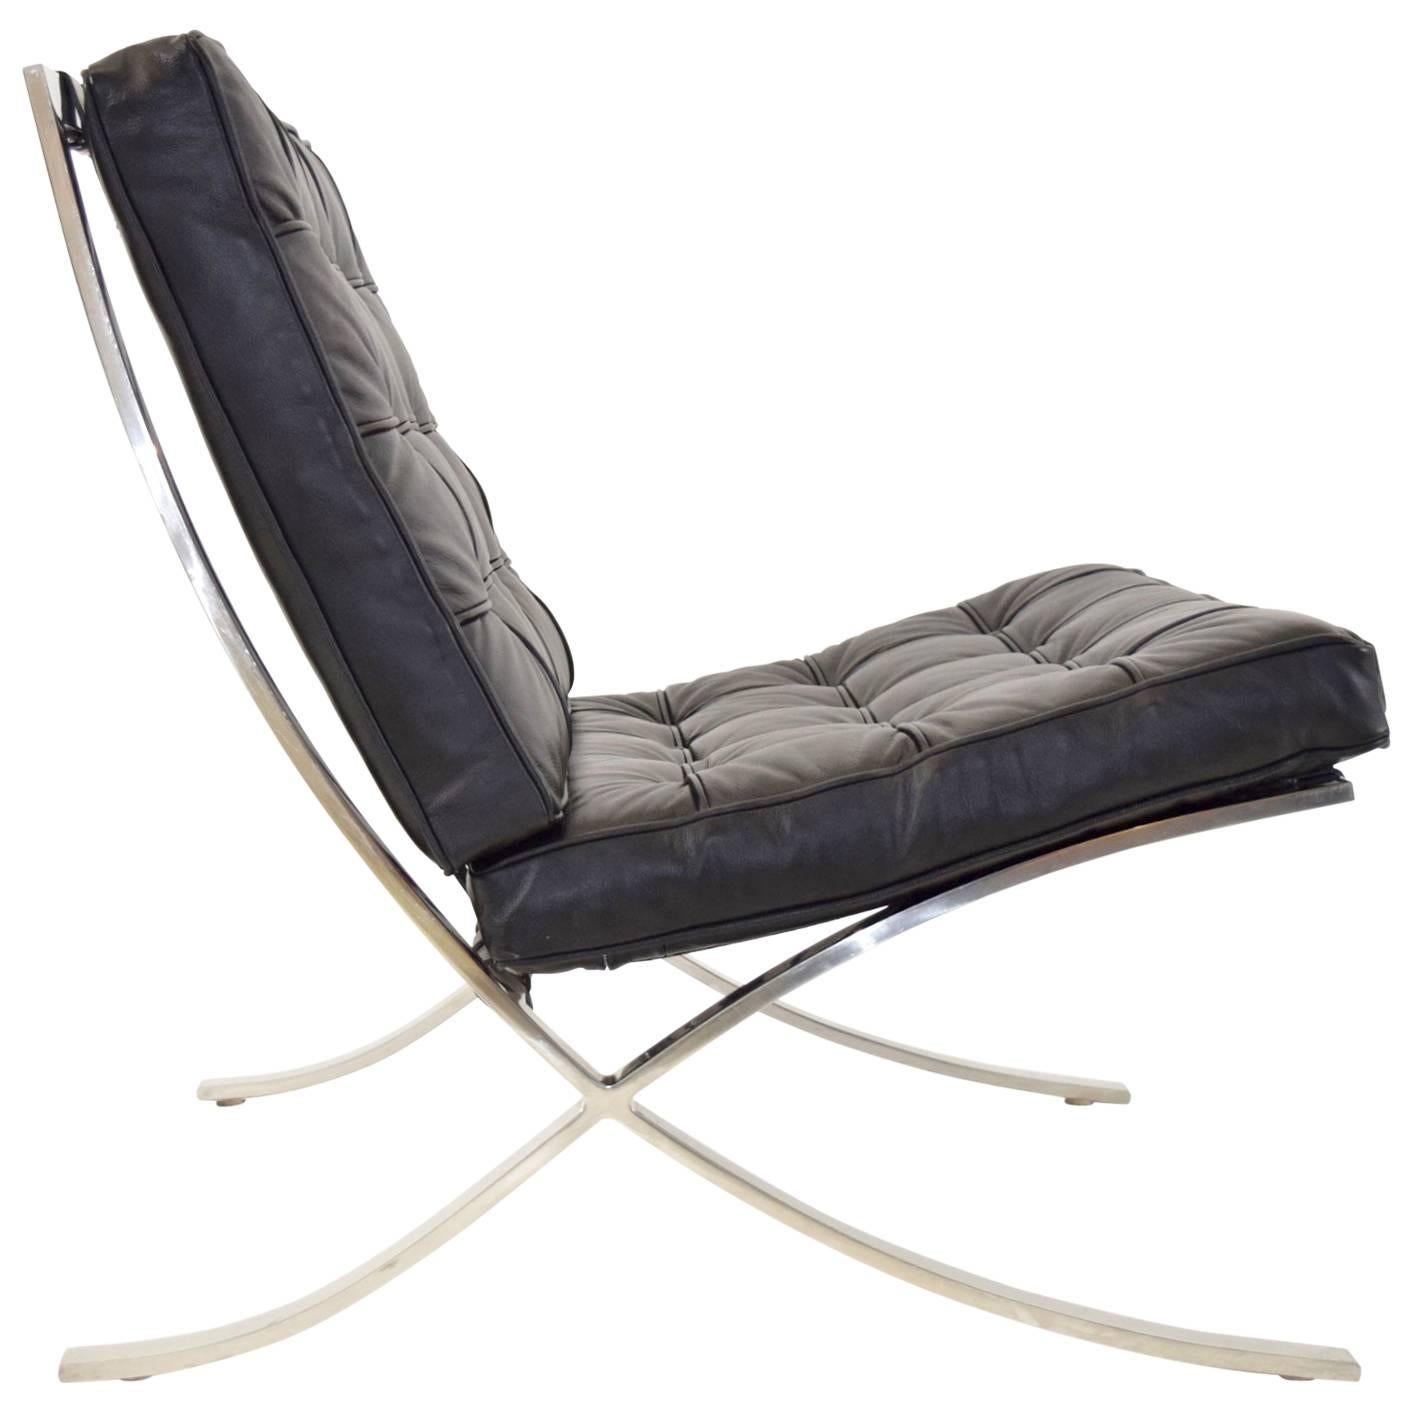 Ludwig Mies van der Rohe Barcelona Chair in Stainless Steel and Black Leather